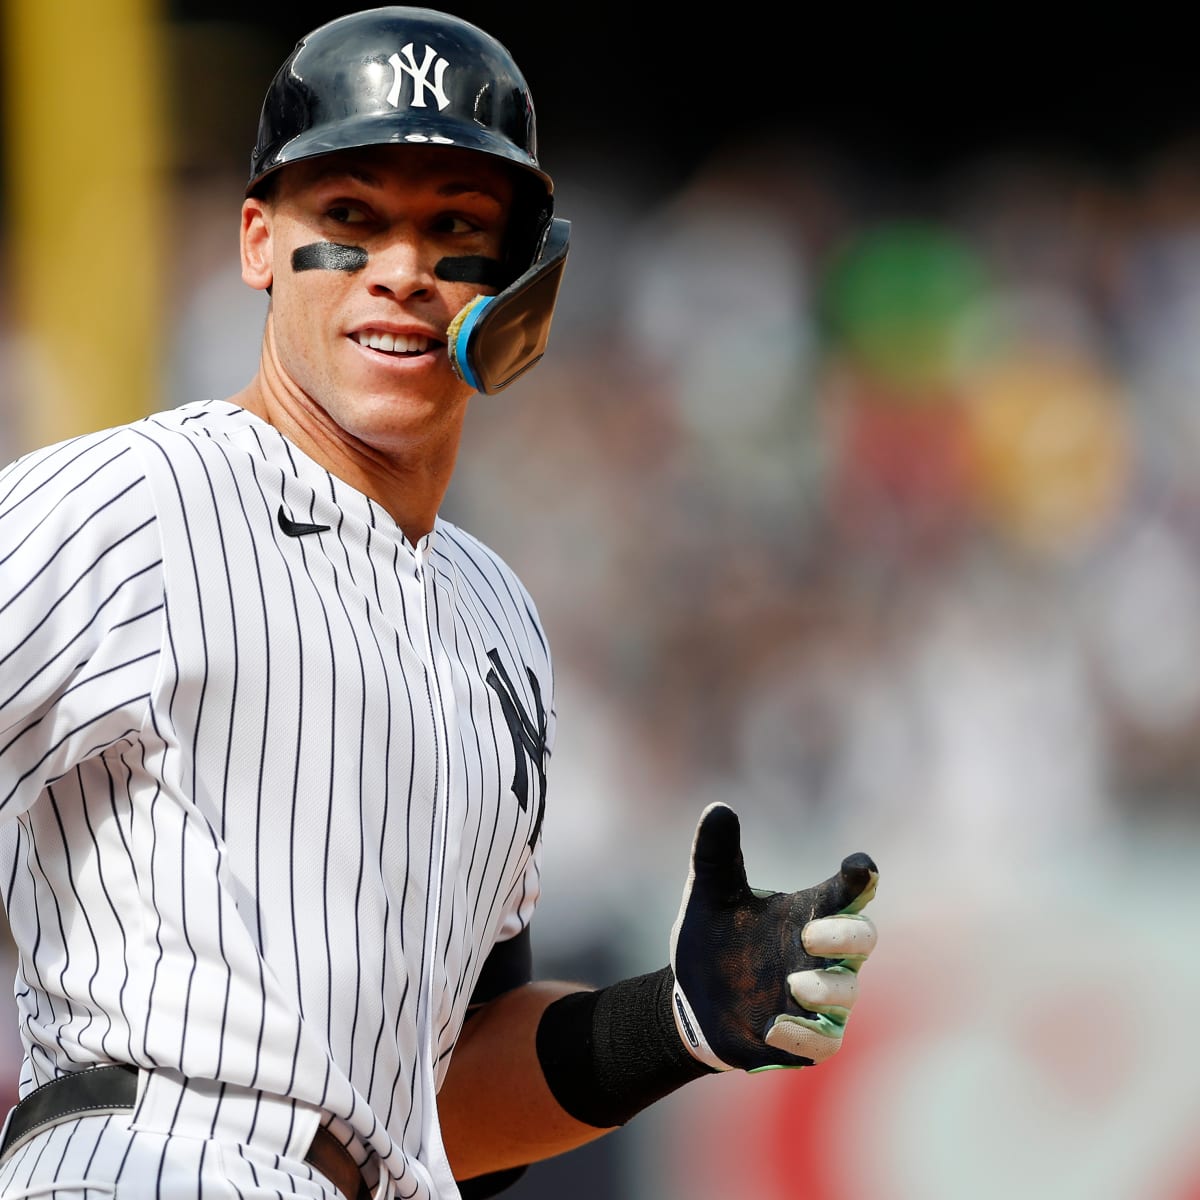 Yankees - Red Sox: No one cares who gives up Aaron Judge's home runs